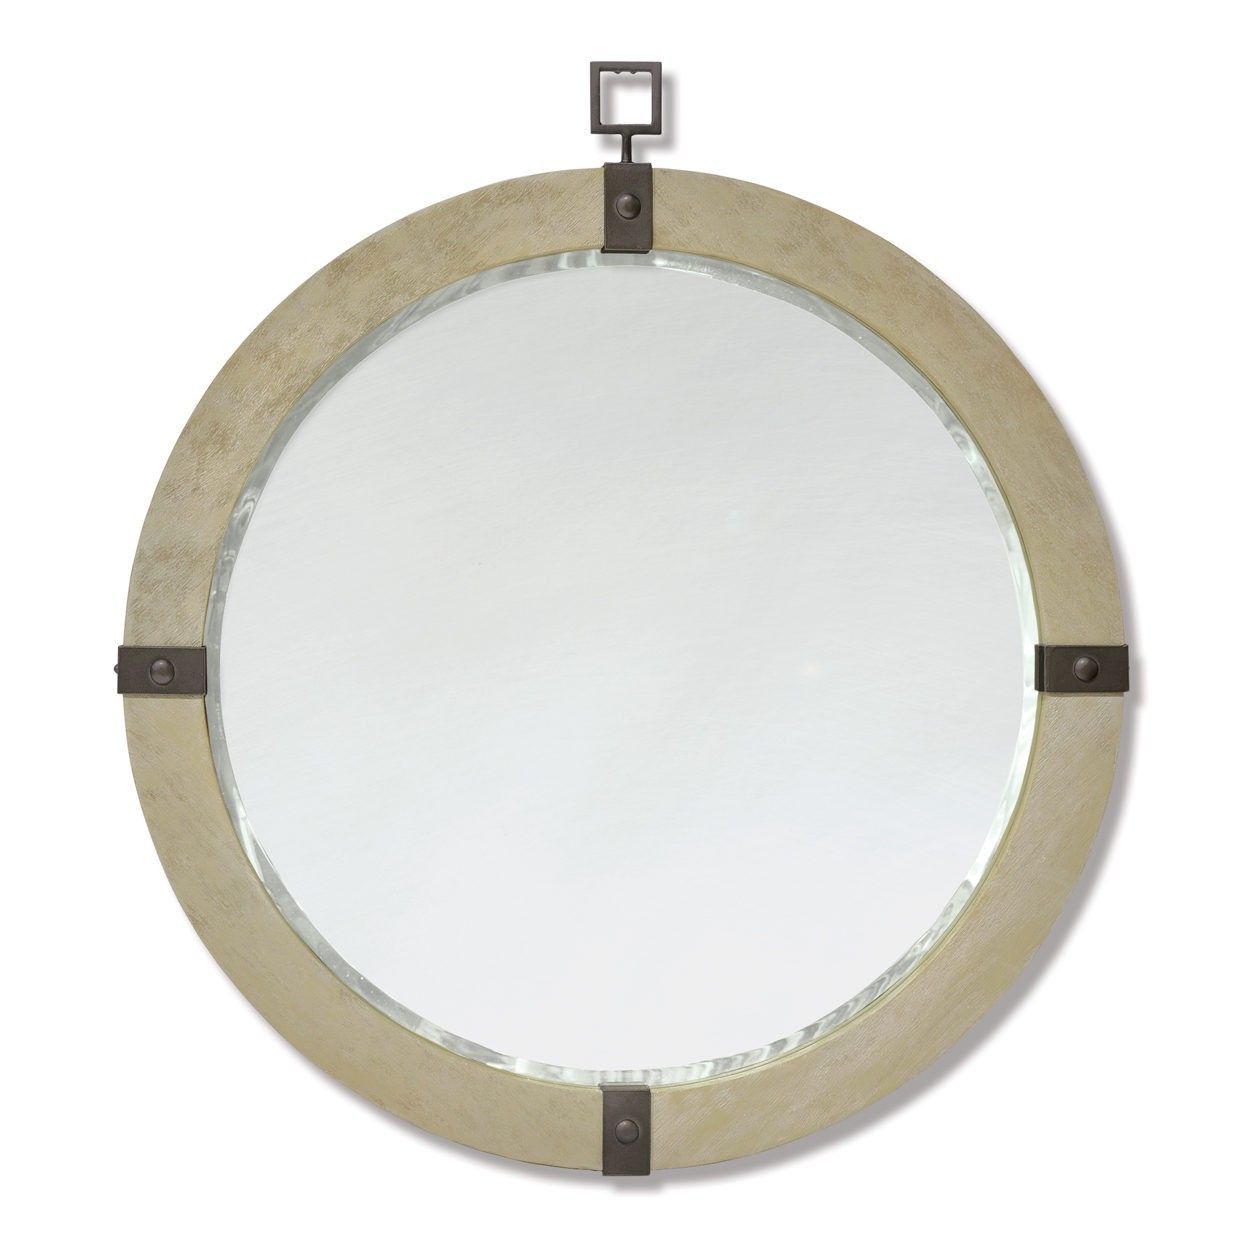 Palecek Brockton Round Mirror | Round Wall Mirror, Mirror Wall, Mirror Intended For Jagged Edge Round Wall Mirrors (View 10 of 15)